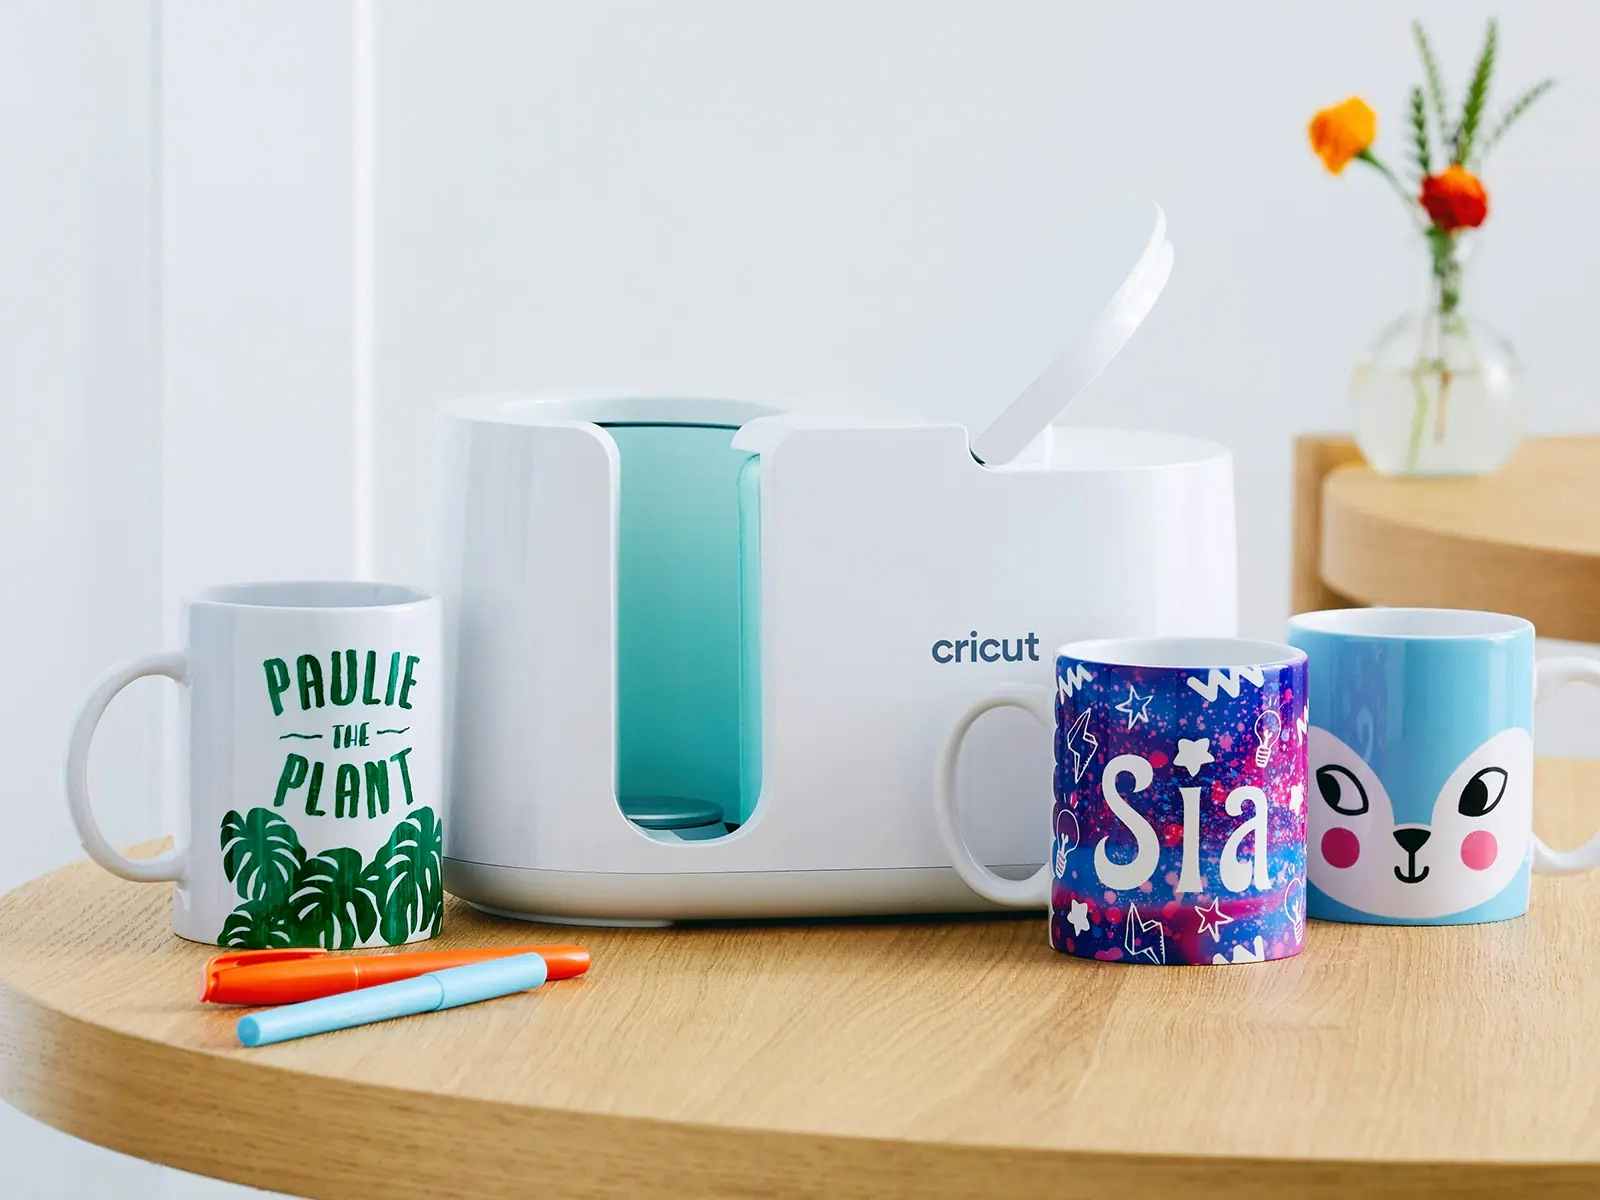 A Cricut mug press on a table with some mugs that have been decorated using the mug press